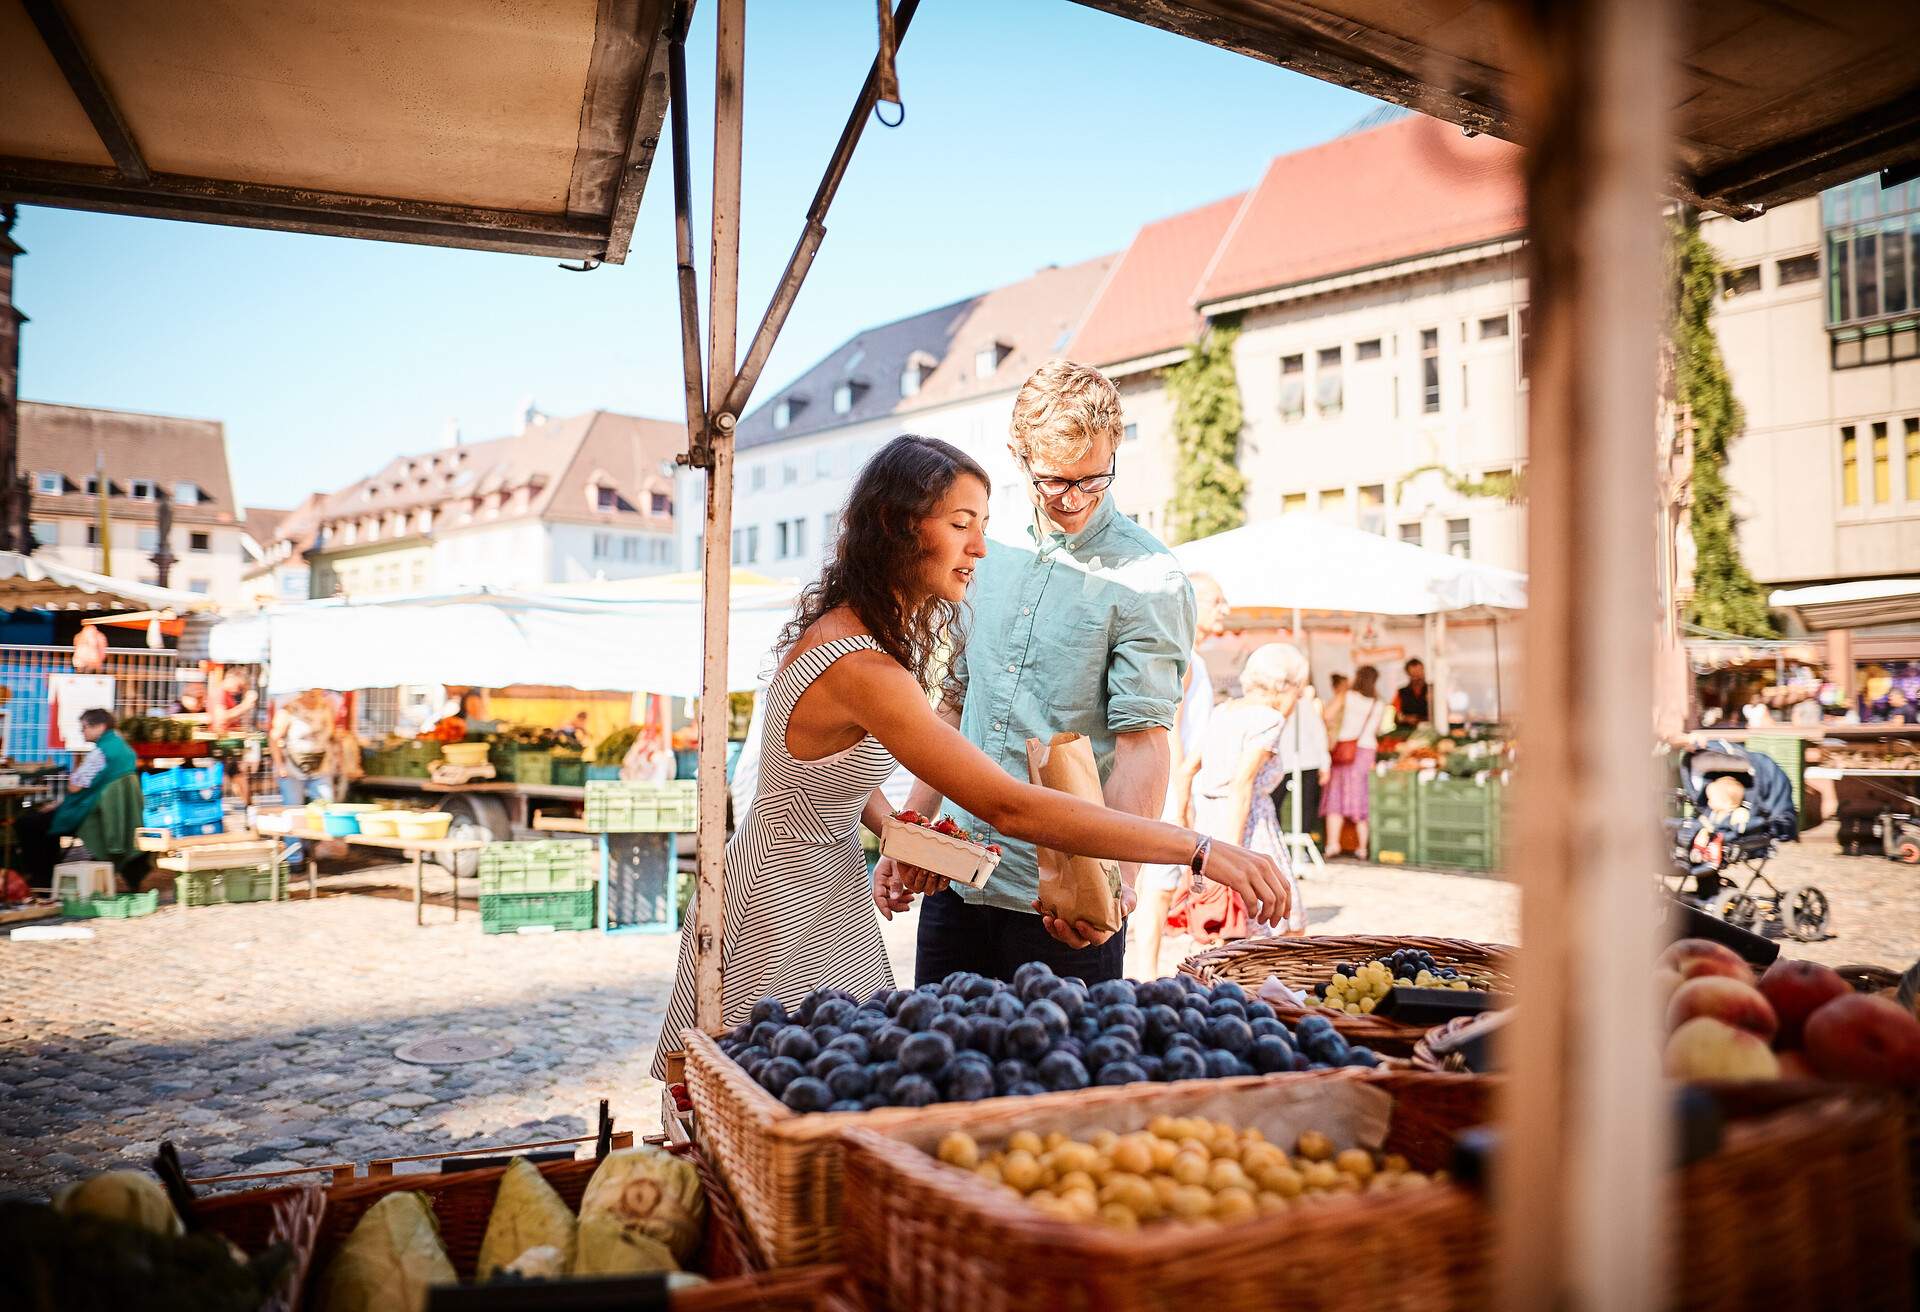 dest_germany_freiburg_theme_people_couple_market_gettyimages-1147568041_universal_within-usage-period_82940